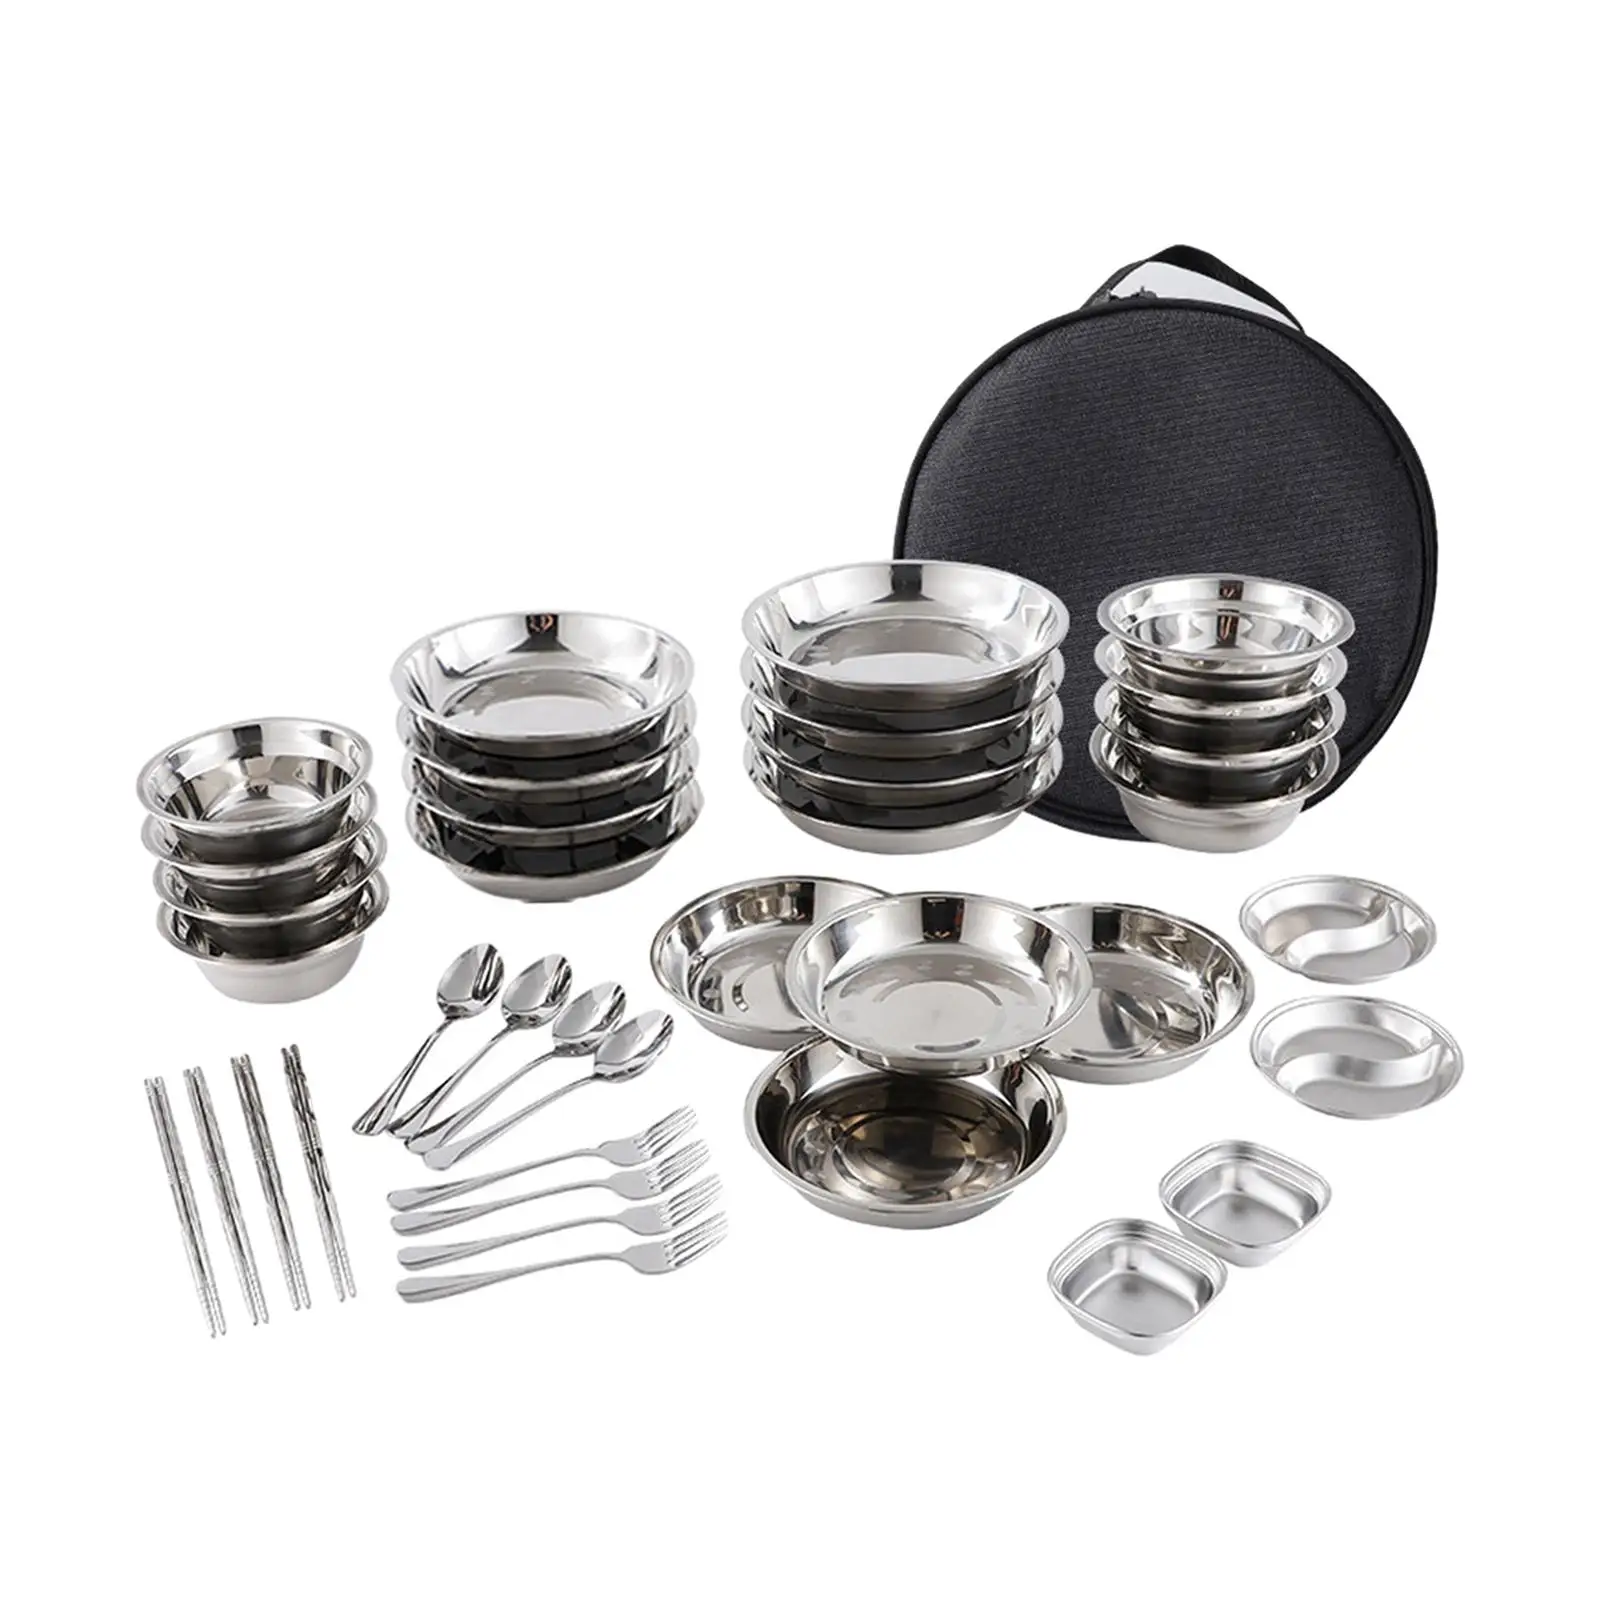 Stainless Steel Plates and Bowls Camping Set Camping Cutlery Set Tableware